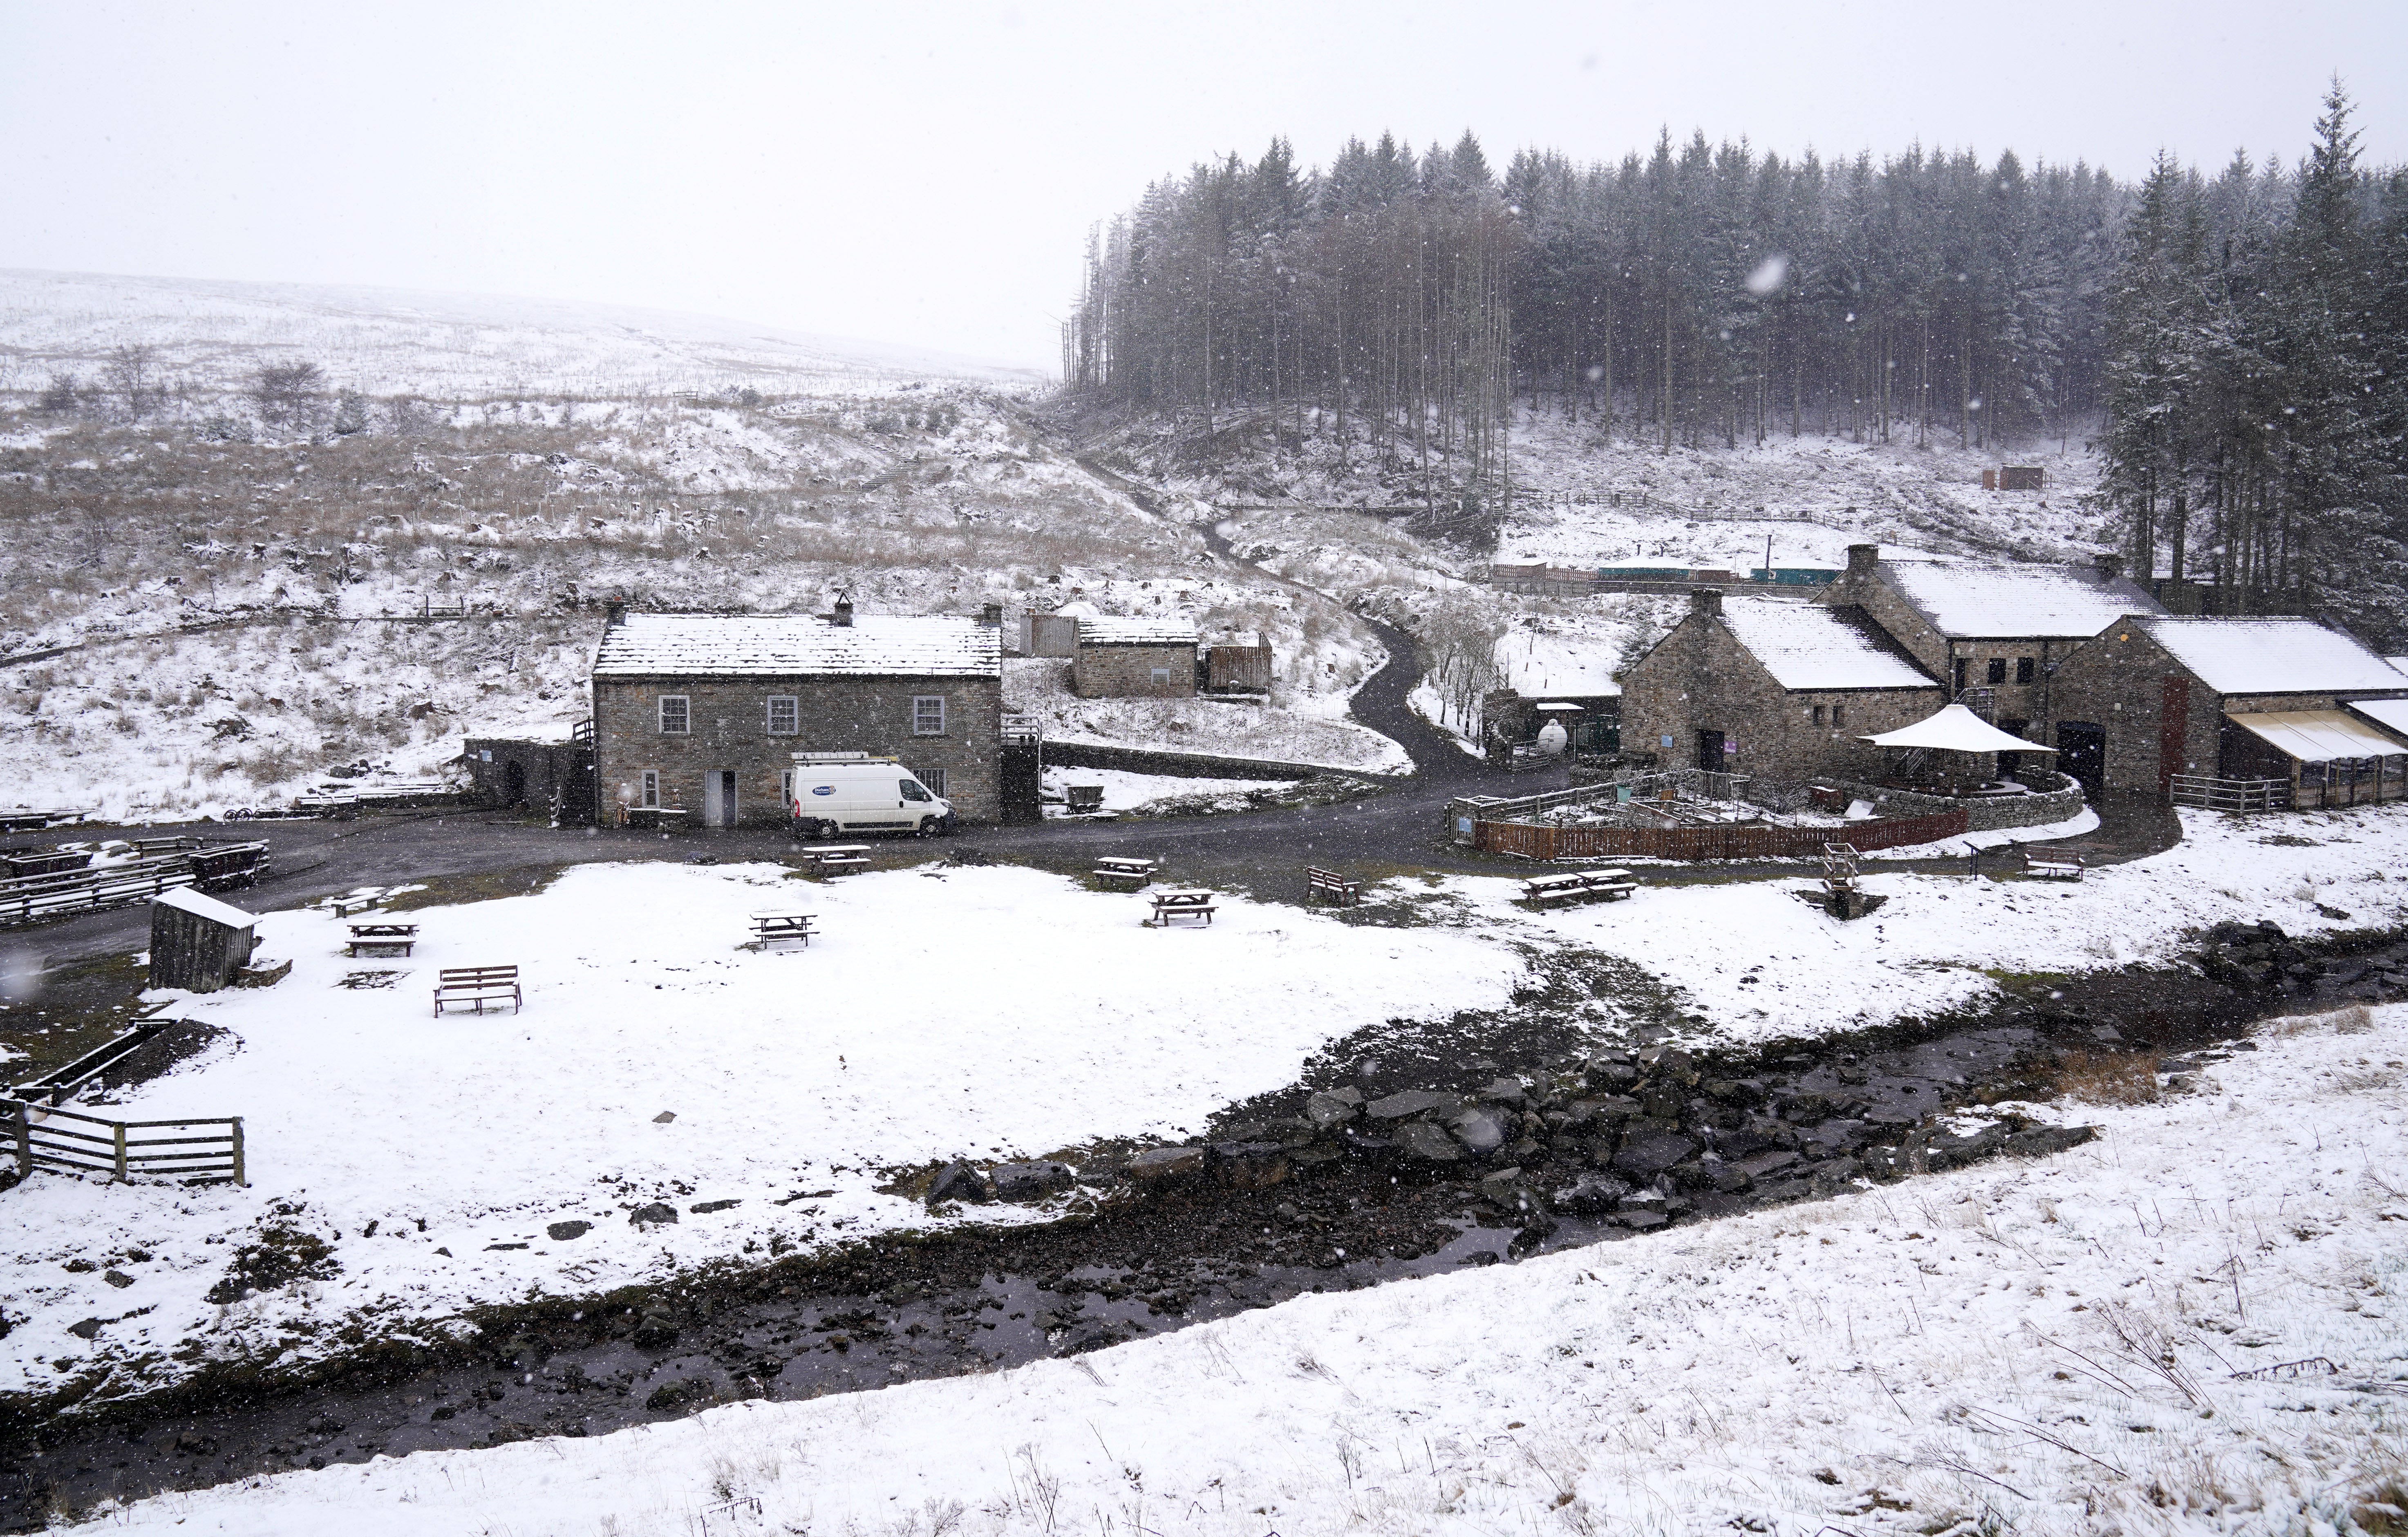 Snow covers the ground at Killhope Slate Mine, in County Durham (Owen Humphrey/PA)